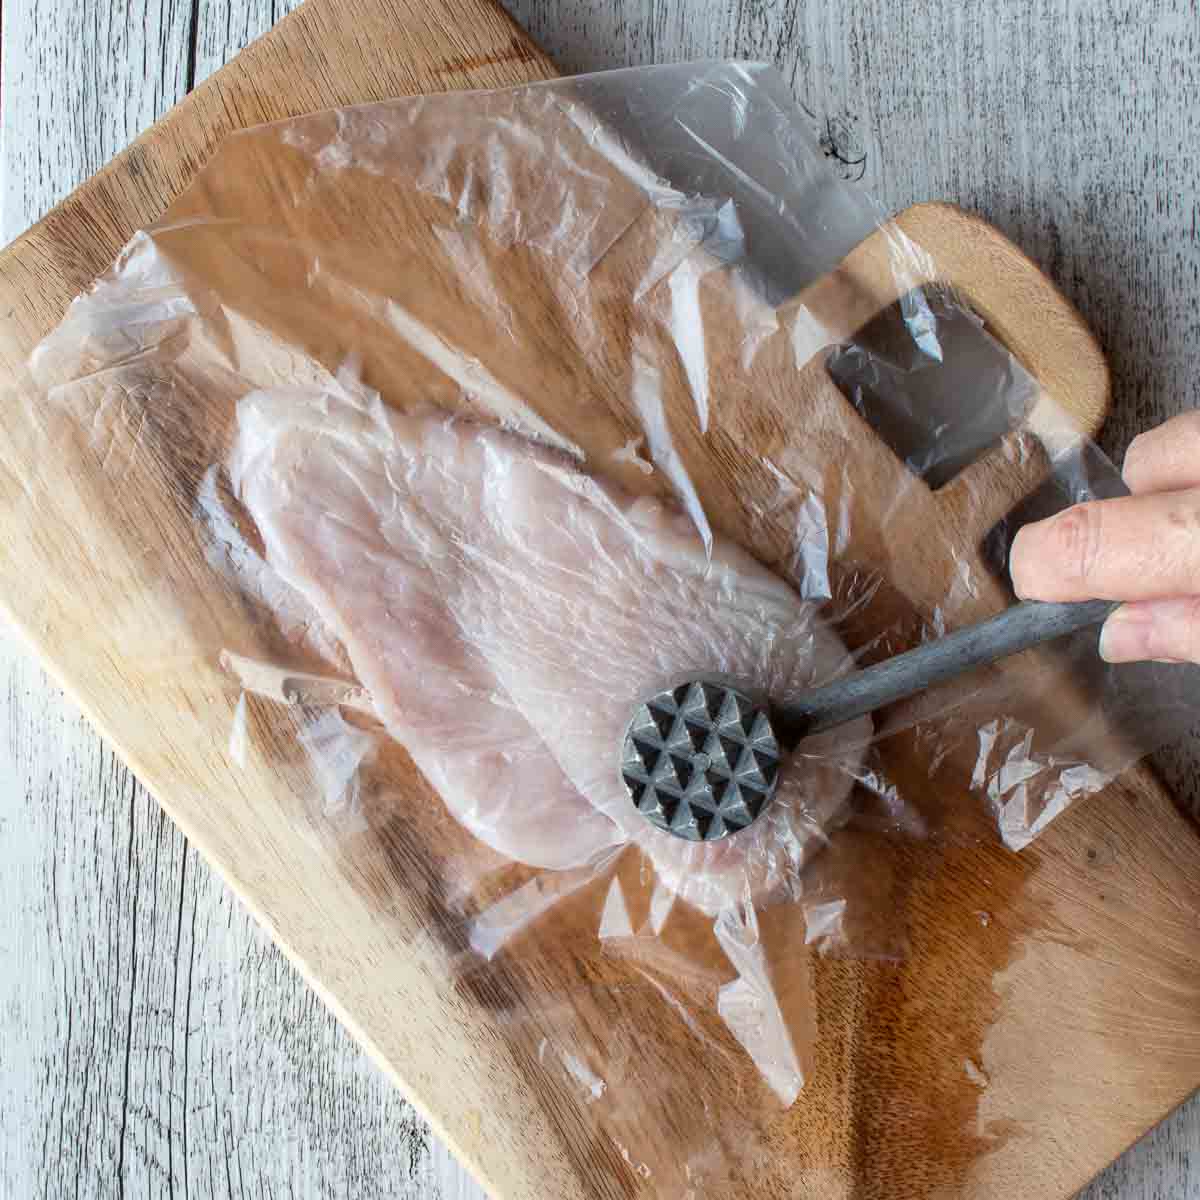 Chicken cutlet covered in plastic being pounded with a meat mallet.